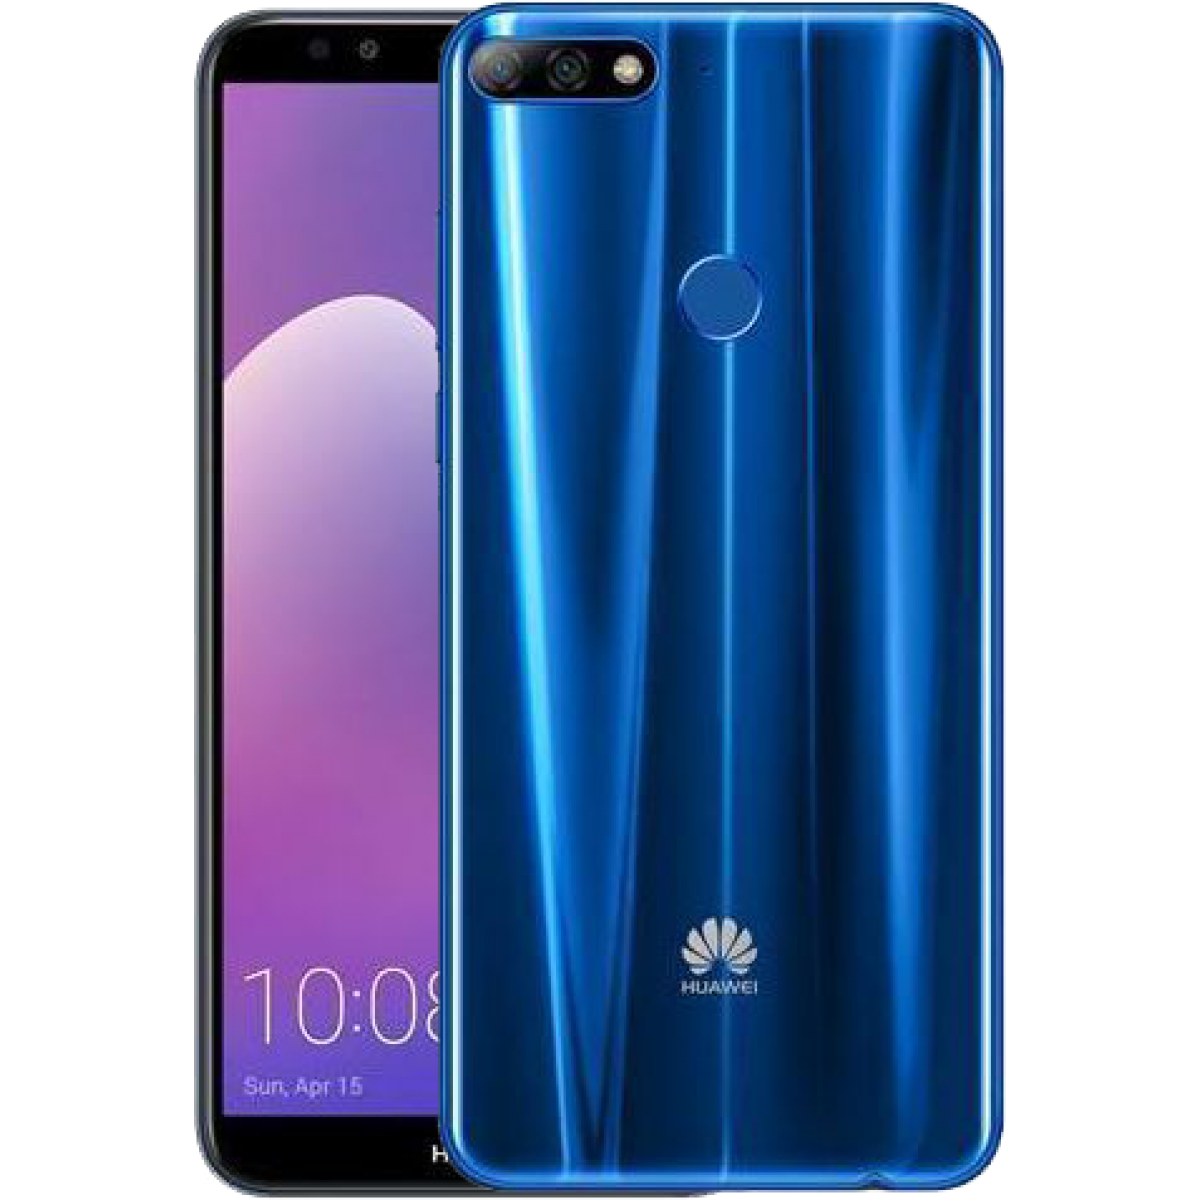 Huawei Y7 Prime 2019 Smartphone Full Specification C9cbae57d4